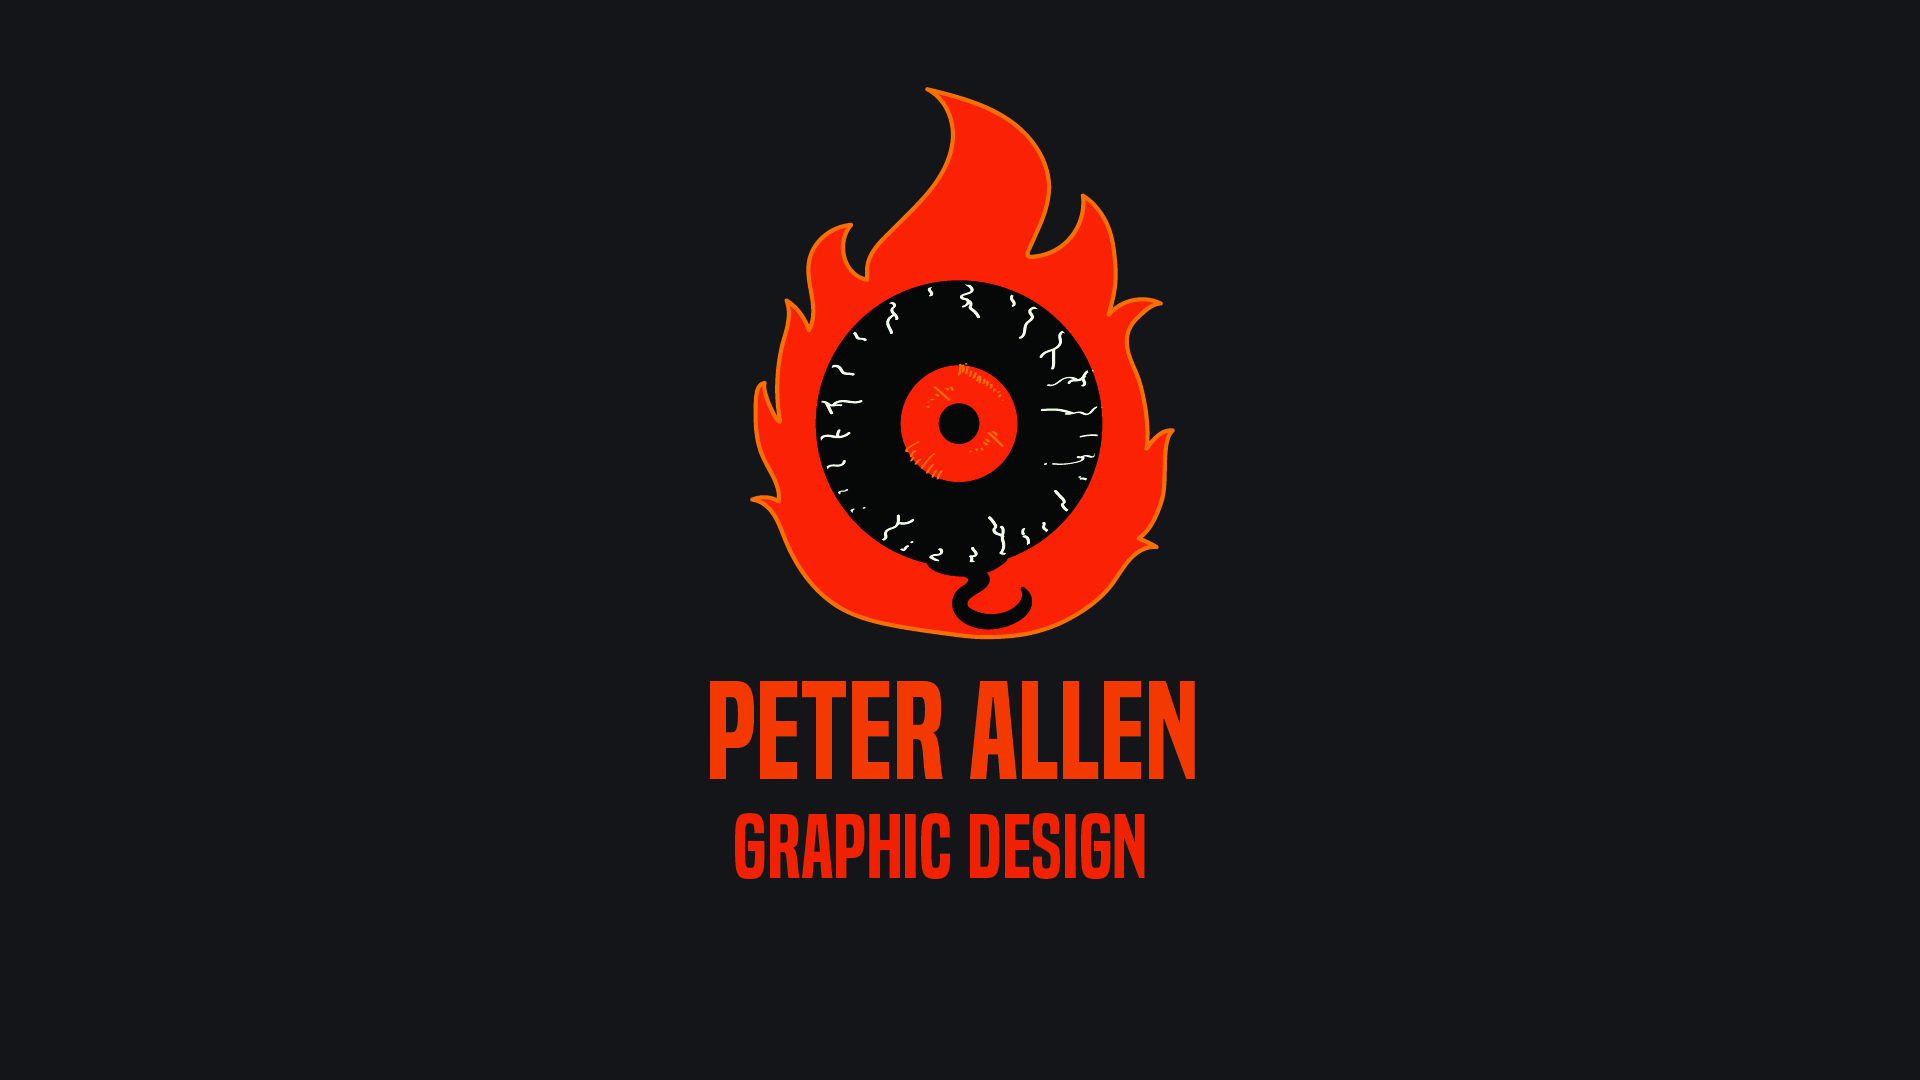 Personal Brand / Personal Brand 1080x1920 pixels web, 2023. This page introduces the viewer to my personal graphic design brand.